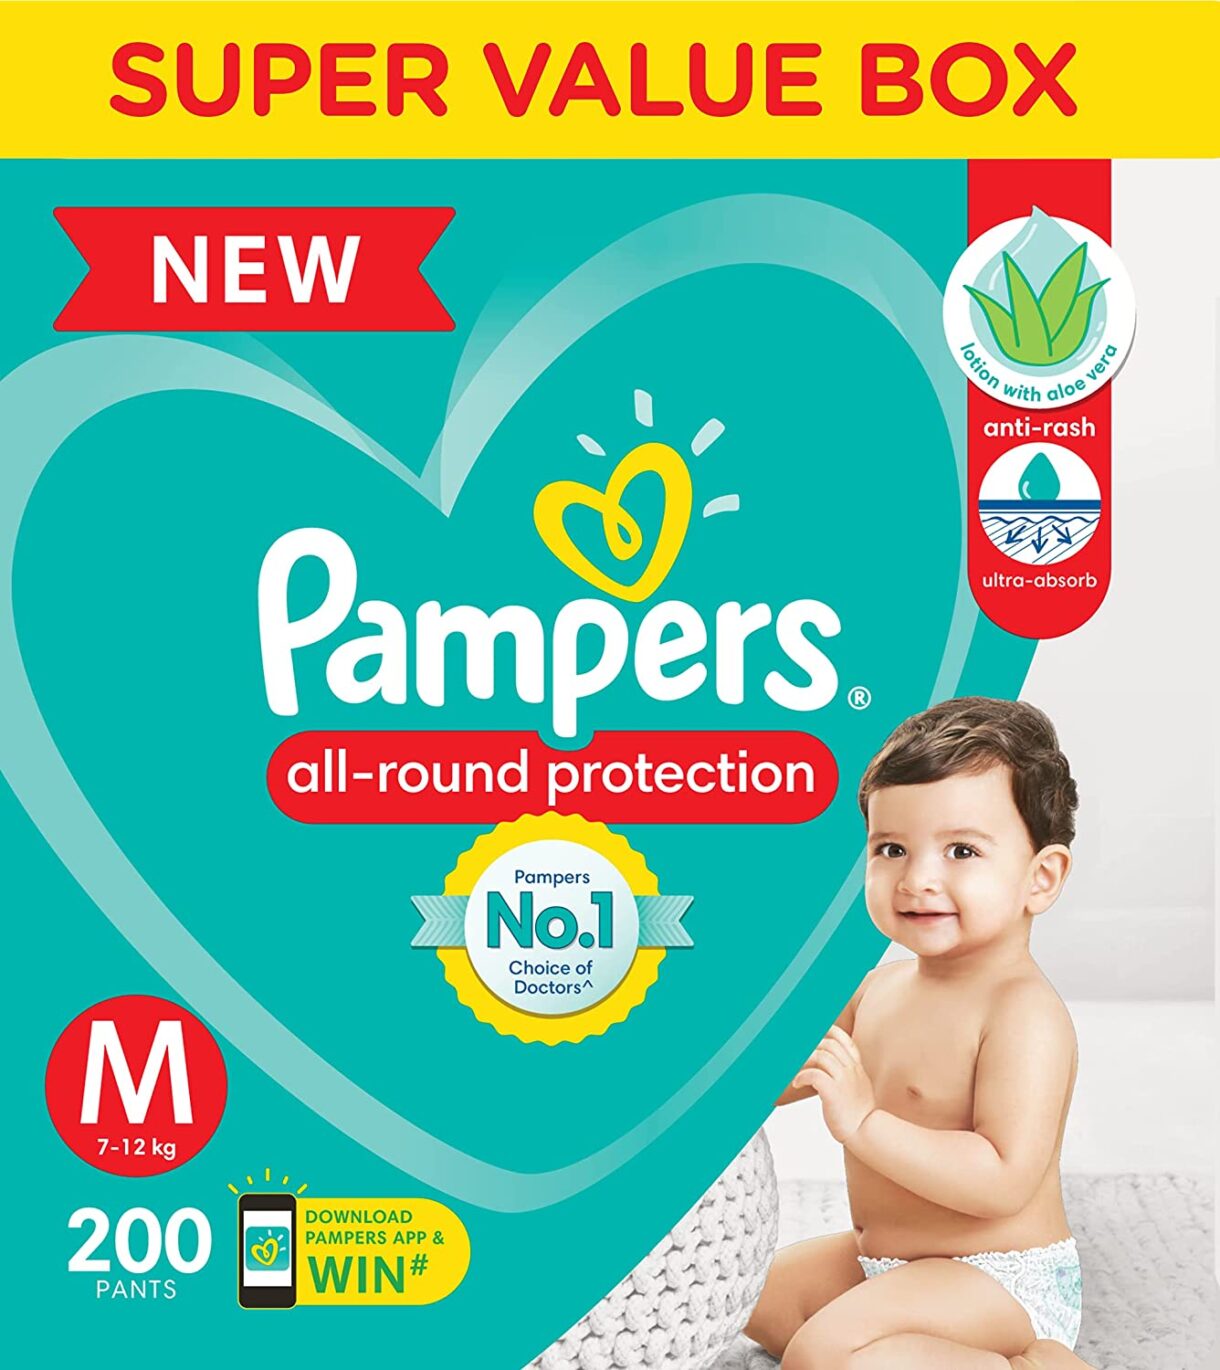 Pampers All round Protection Pants, Medium size baby diapers (MD) 200 Count, Lotion with Aloe Vera 200